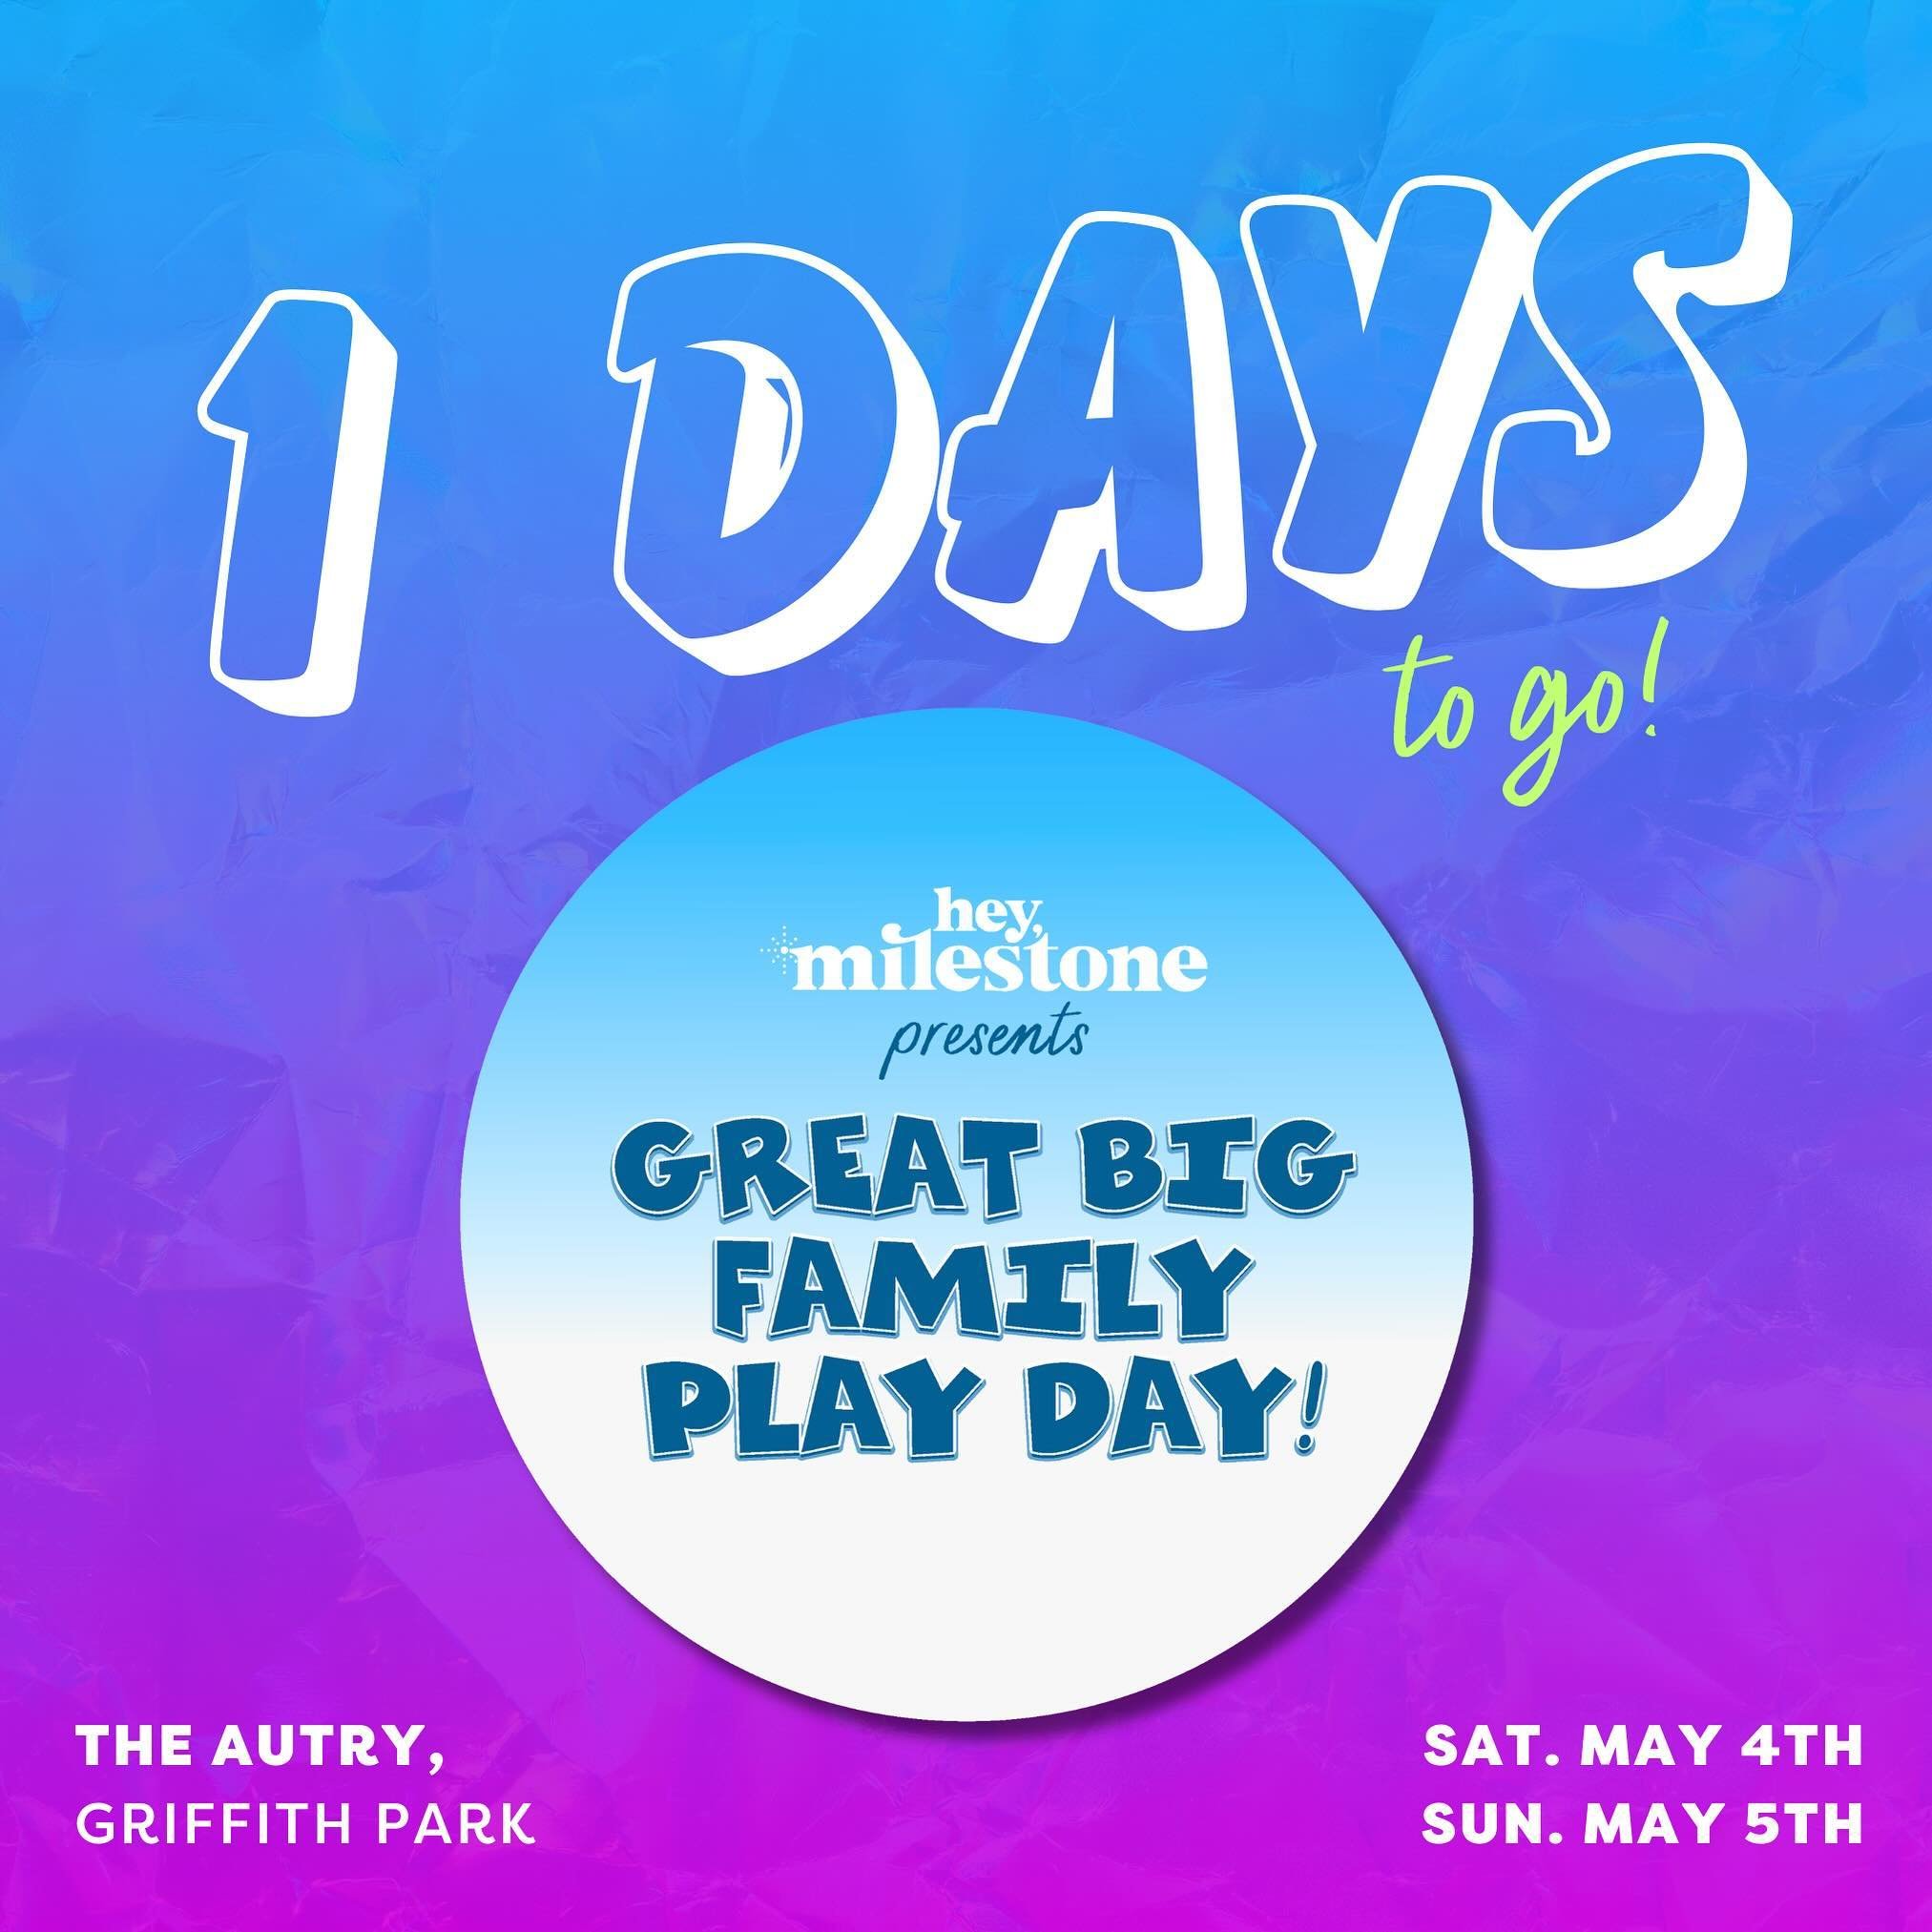 What to Know Before You Go to @greatbigfamilyplayday ⬇️

🎟️Pre-Sale Tickets:
Please make sure you have your event tickets readily available either on your phone or printed. You need to have your tickets with you.

🎟️Onsite Tickets:
You can buy tick